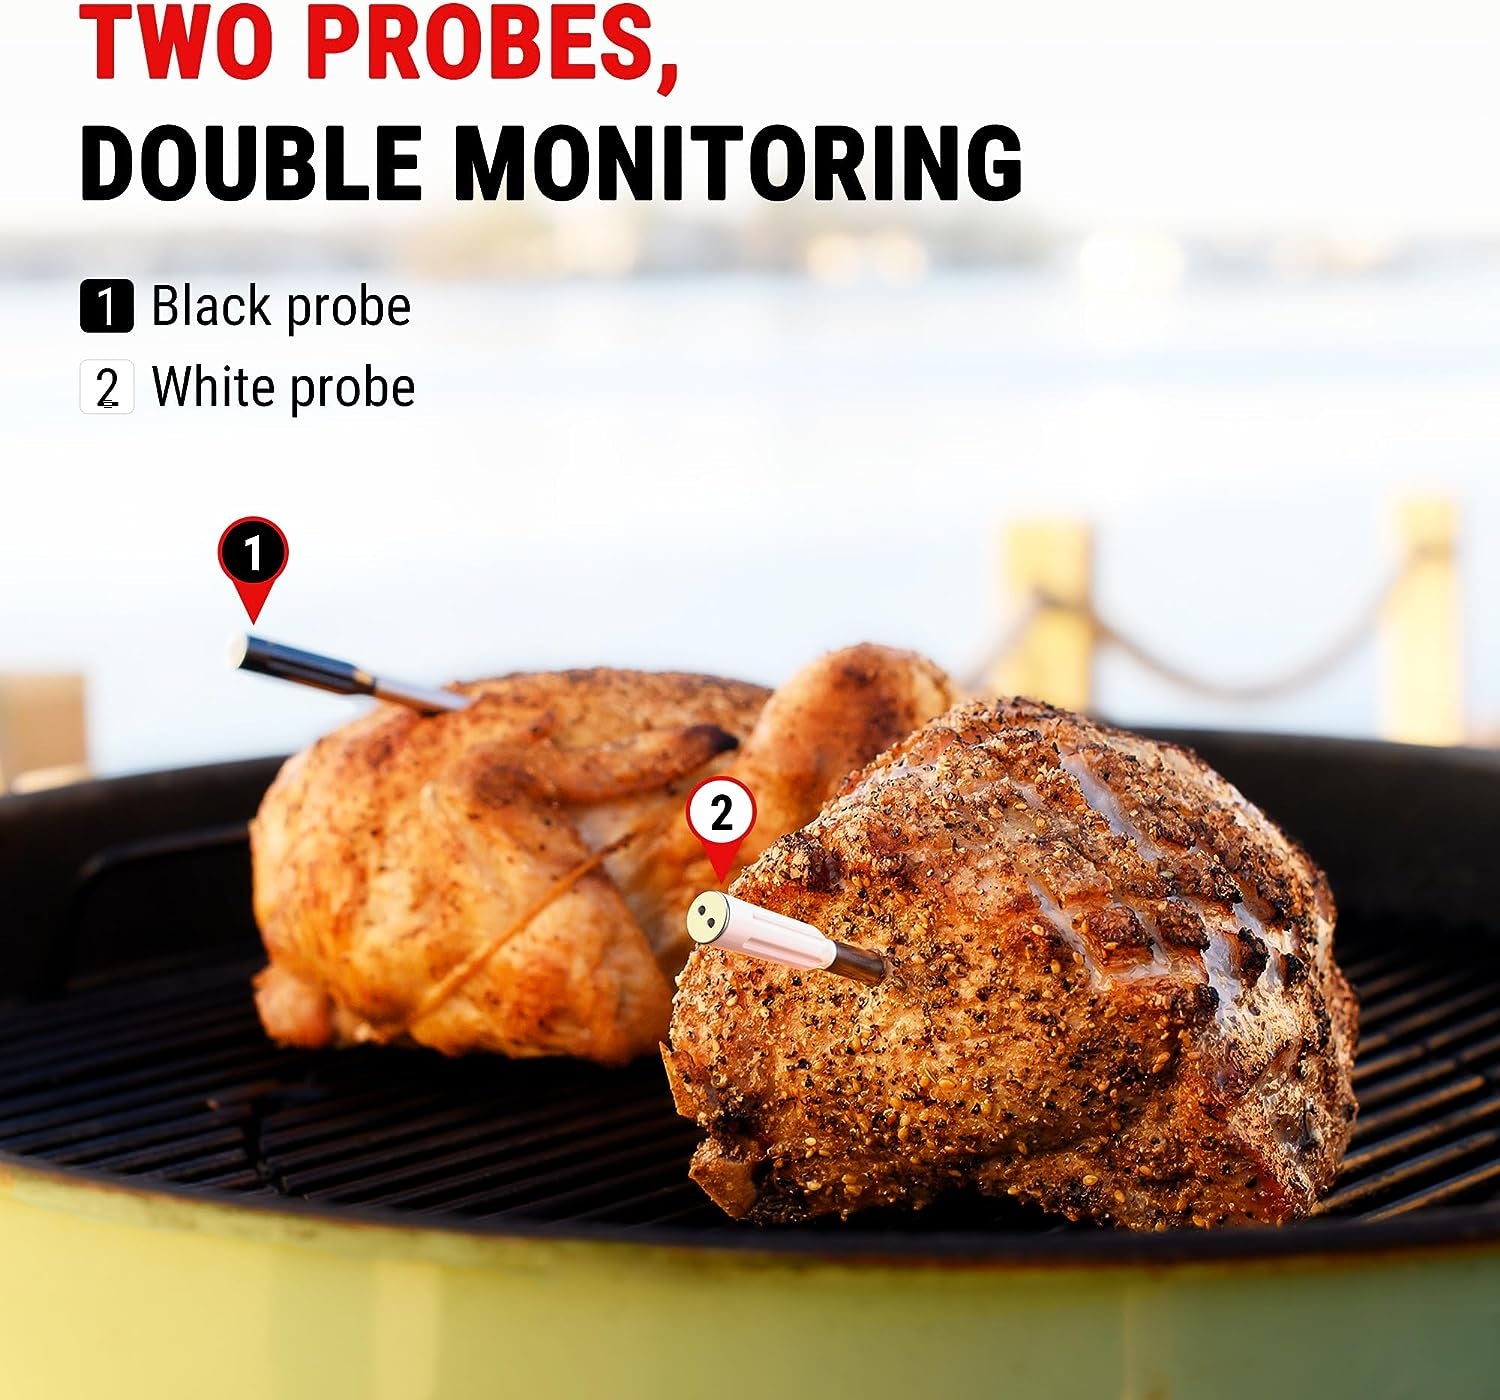  ThermoPro TempSpike 500FT Wireless Meat Thermometer